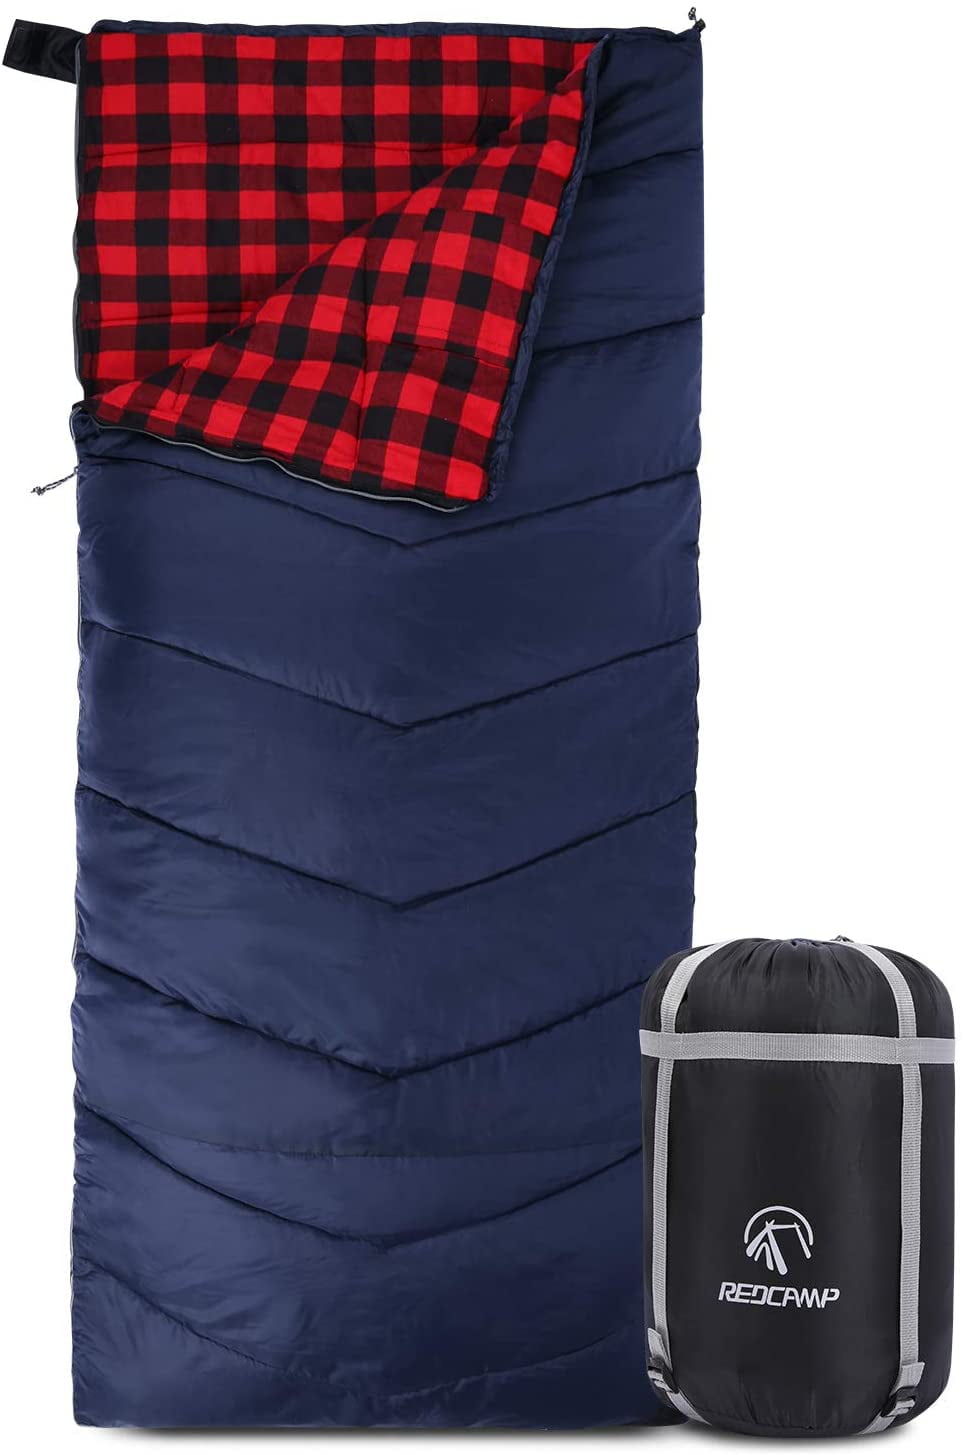 Ozark Trail Blue Patterned Outdoor Blanket With Fleece Top And Waterproof  Bottom For Camping And Picnics Shop, 58% OFF | centro-innato.com